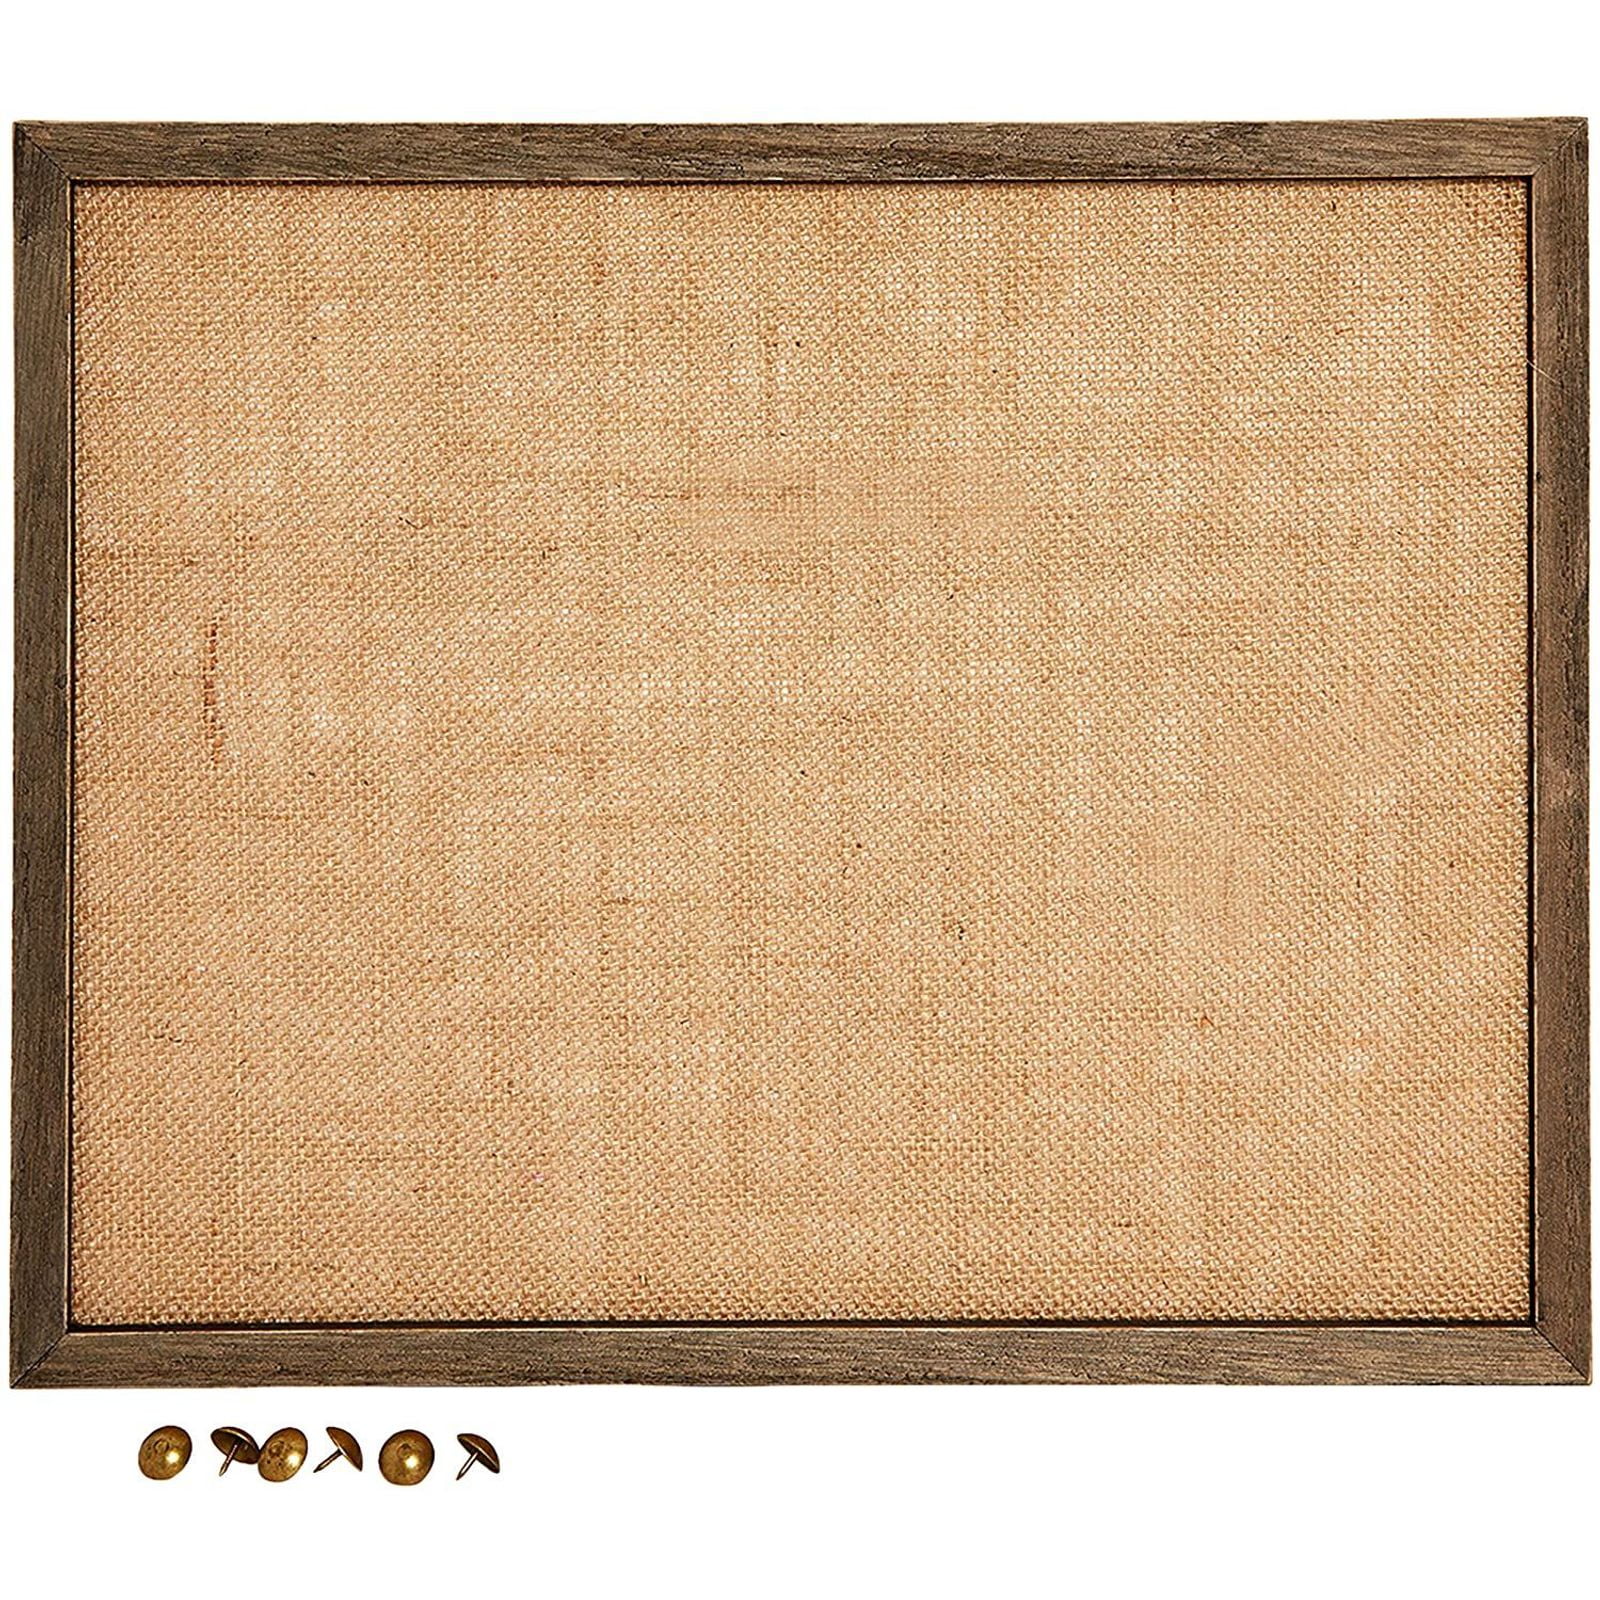 Custom Made Linen Pin/Memo/Notice Cork Board 17 colours 8 sizes made to order! 